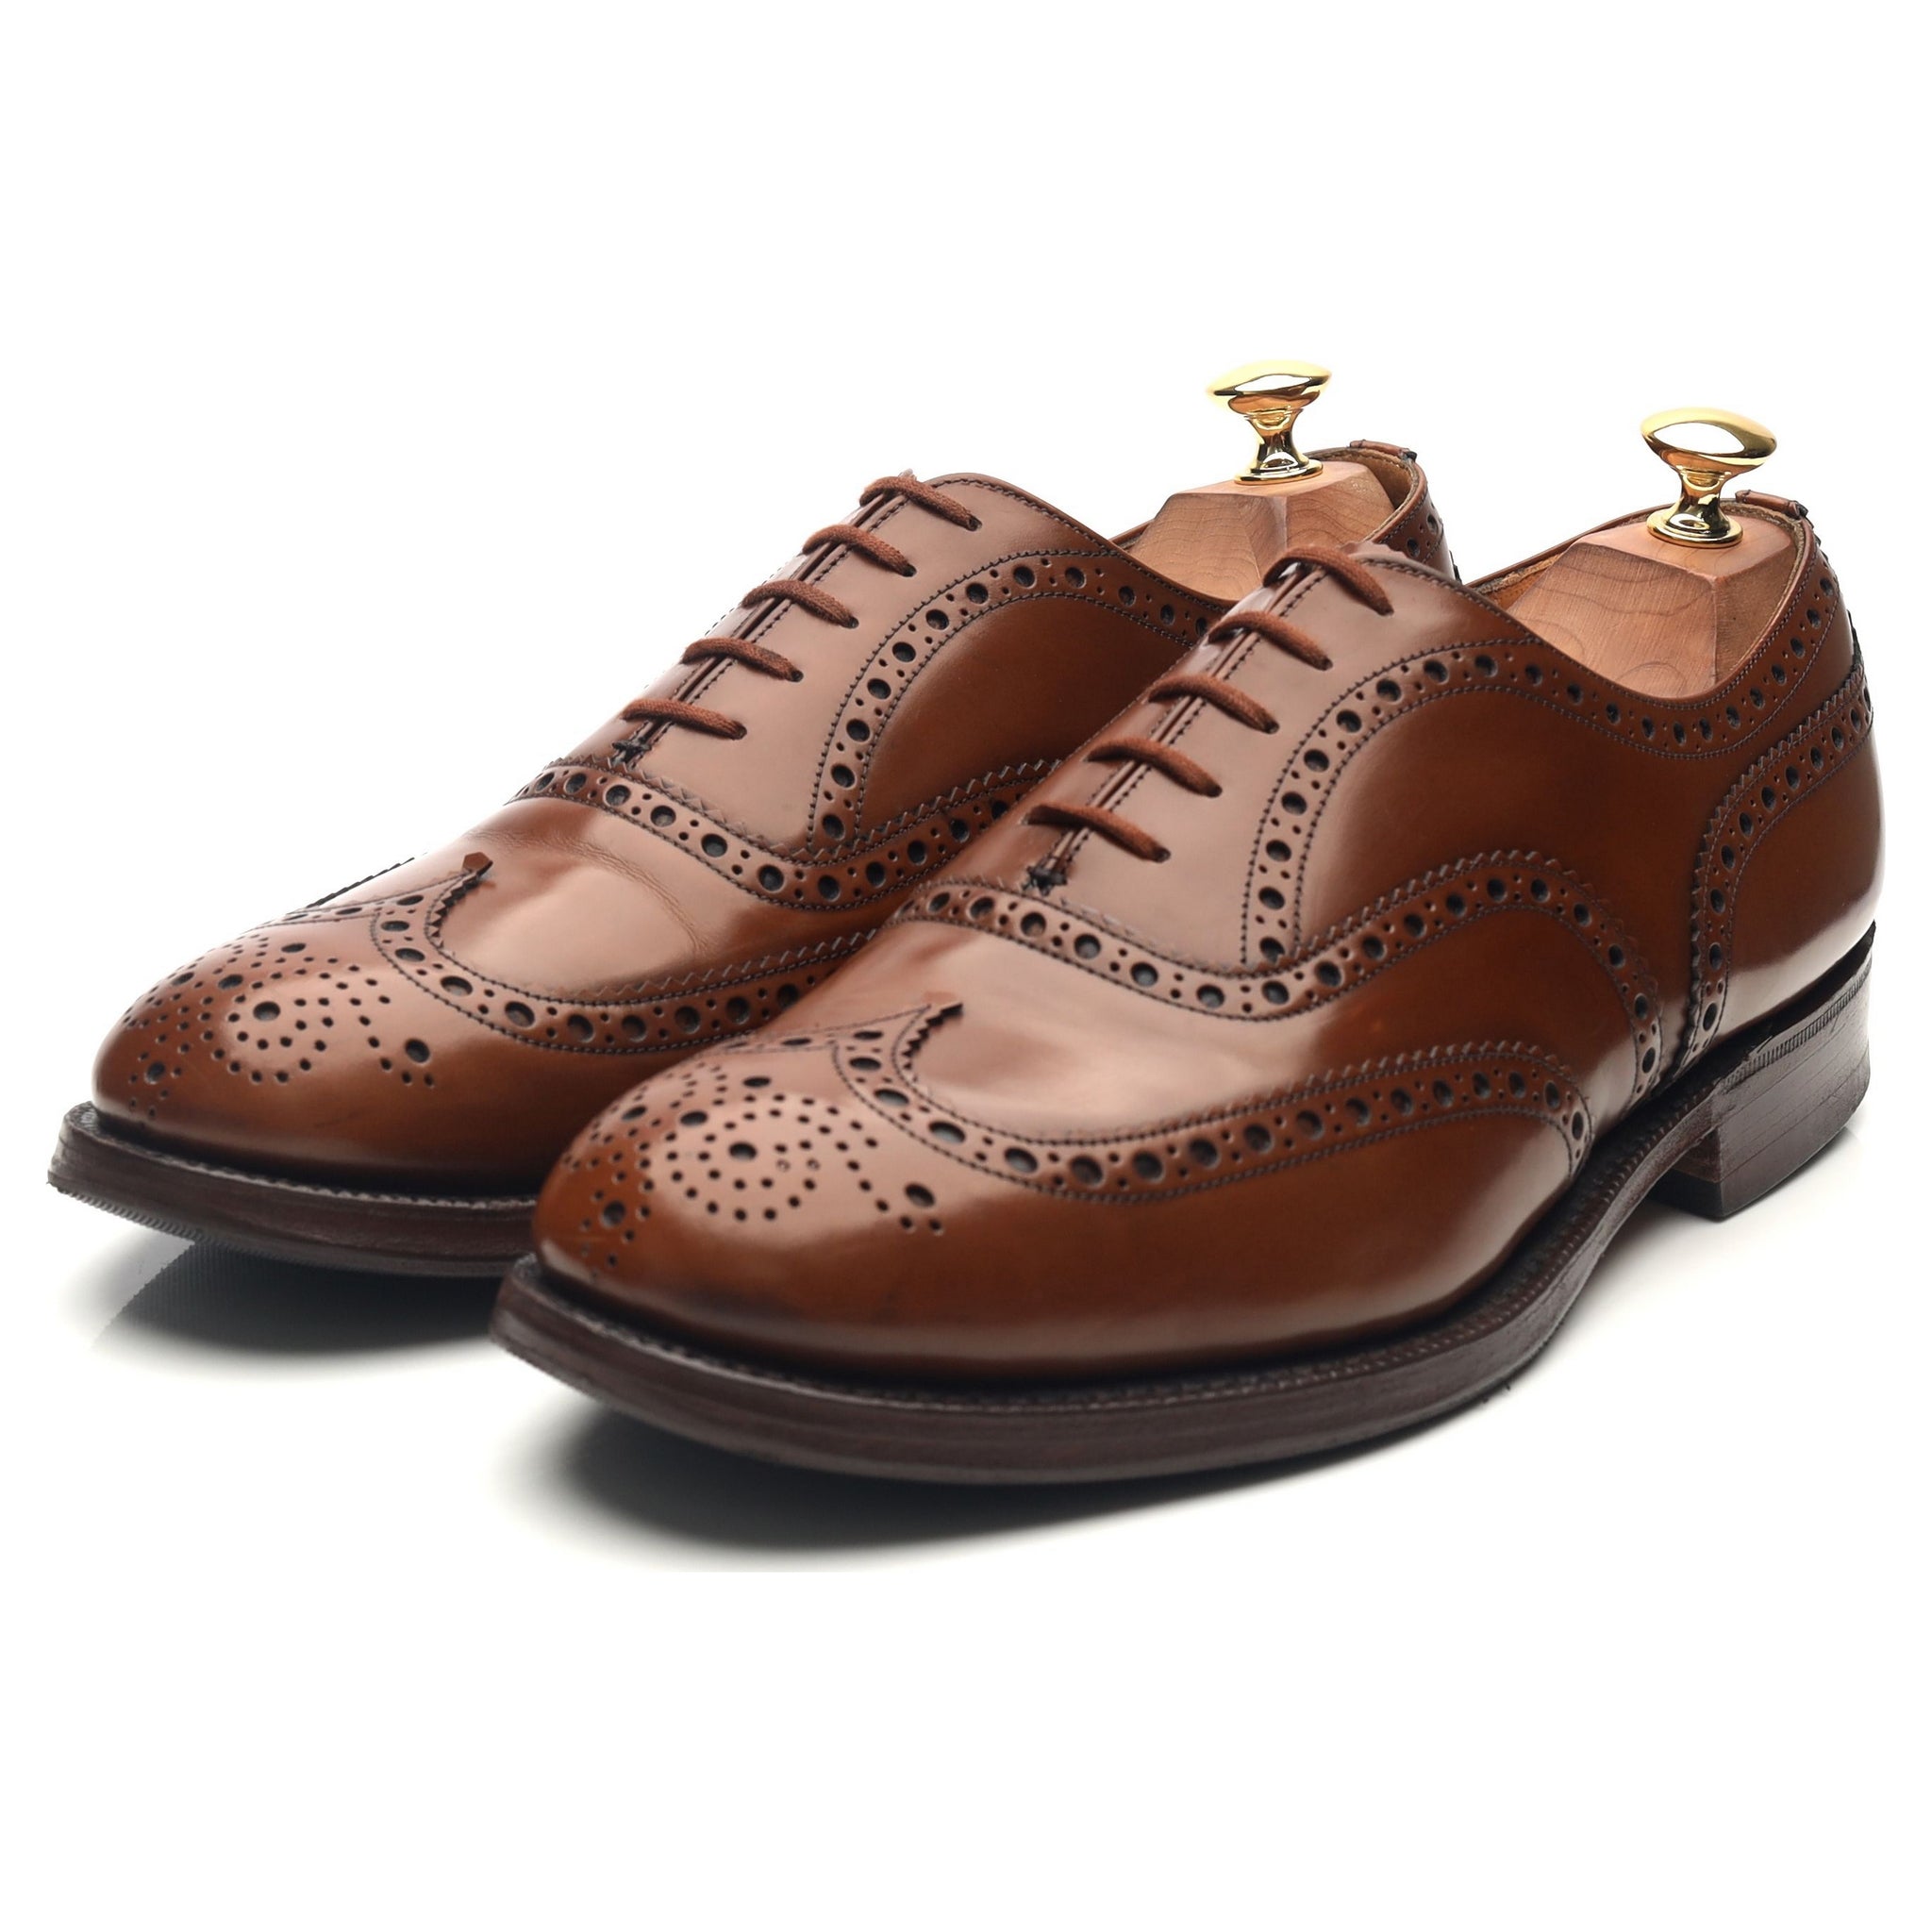 Burwood' Brown Leather Brogues UK 9 G - Abbot's Shoes